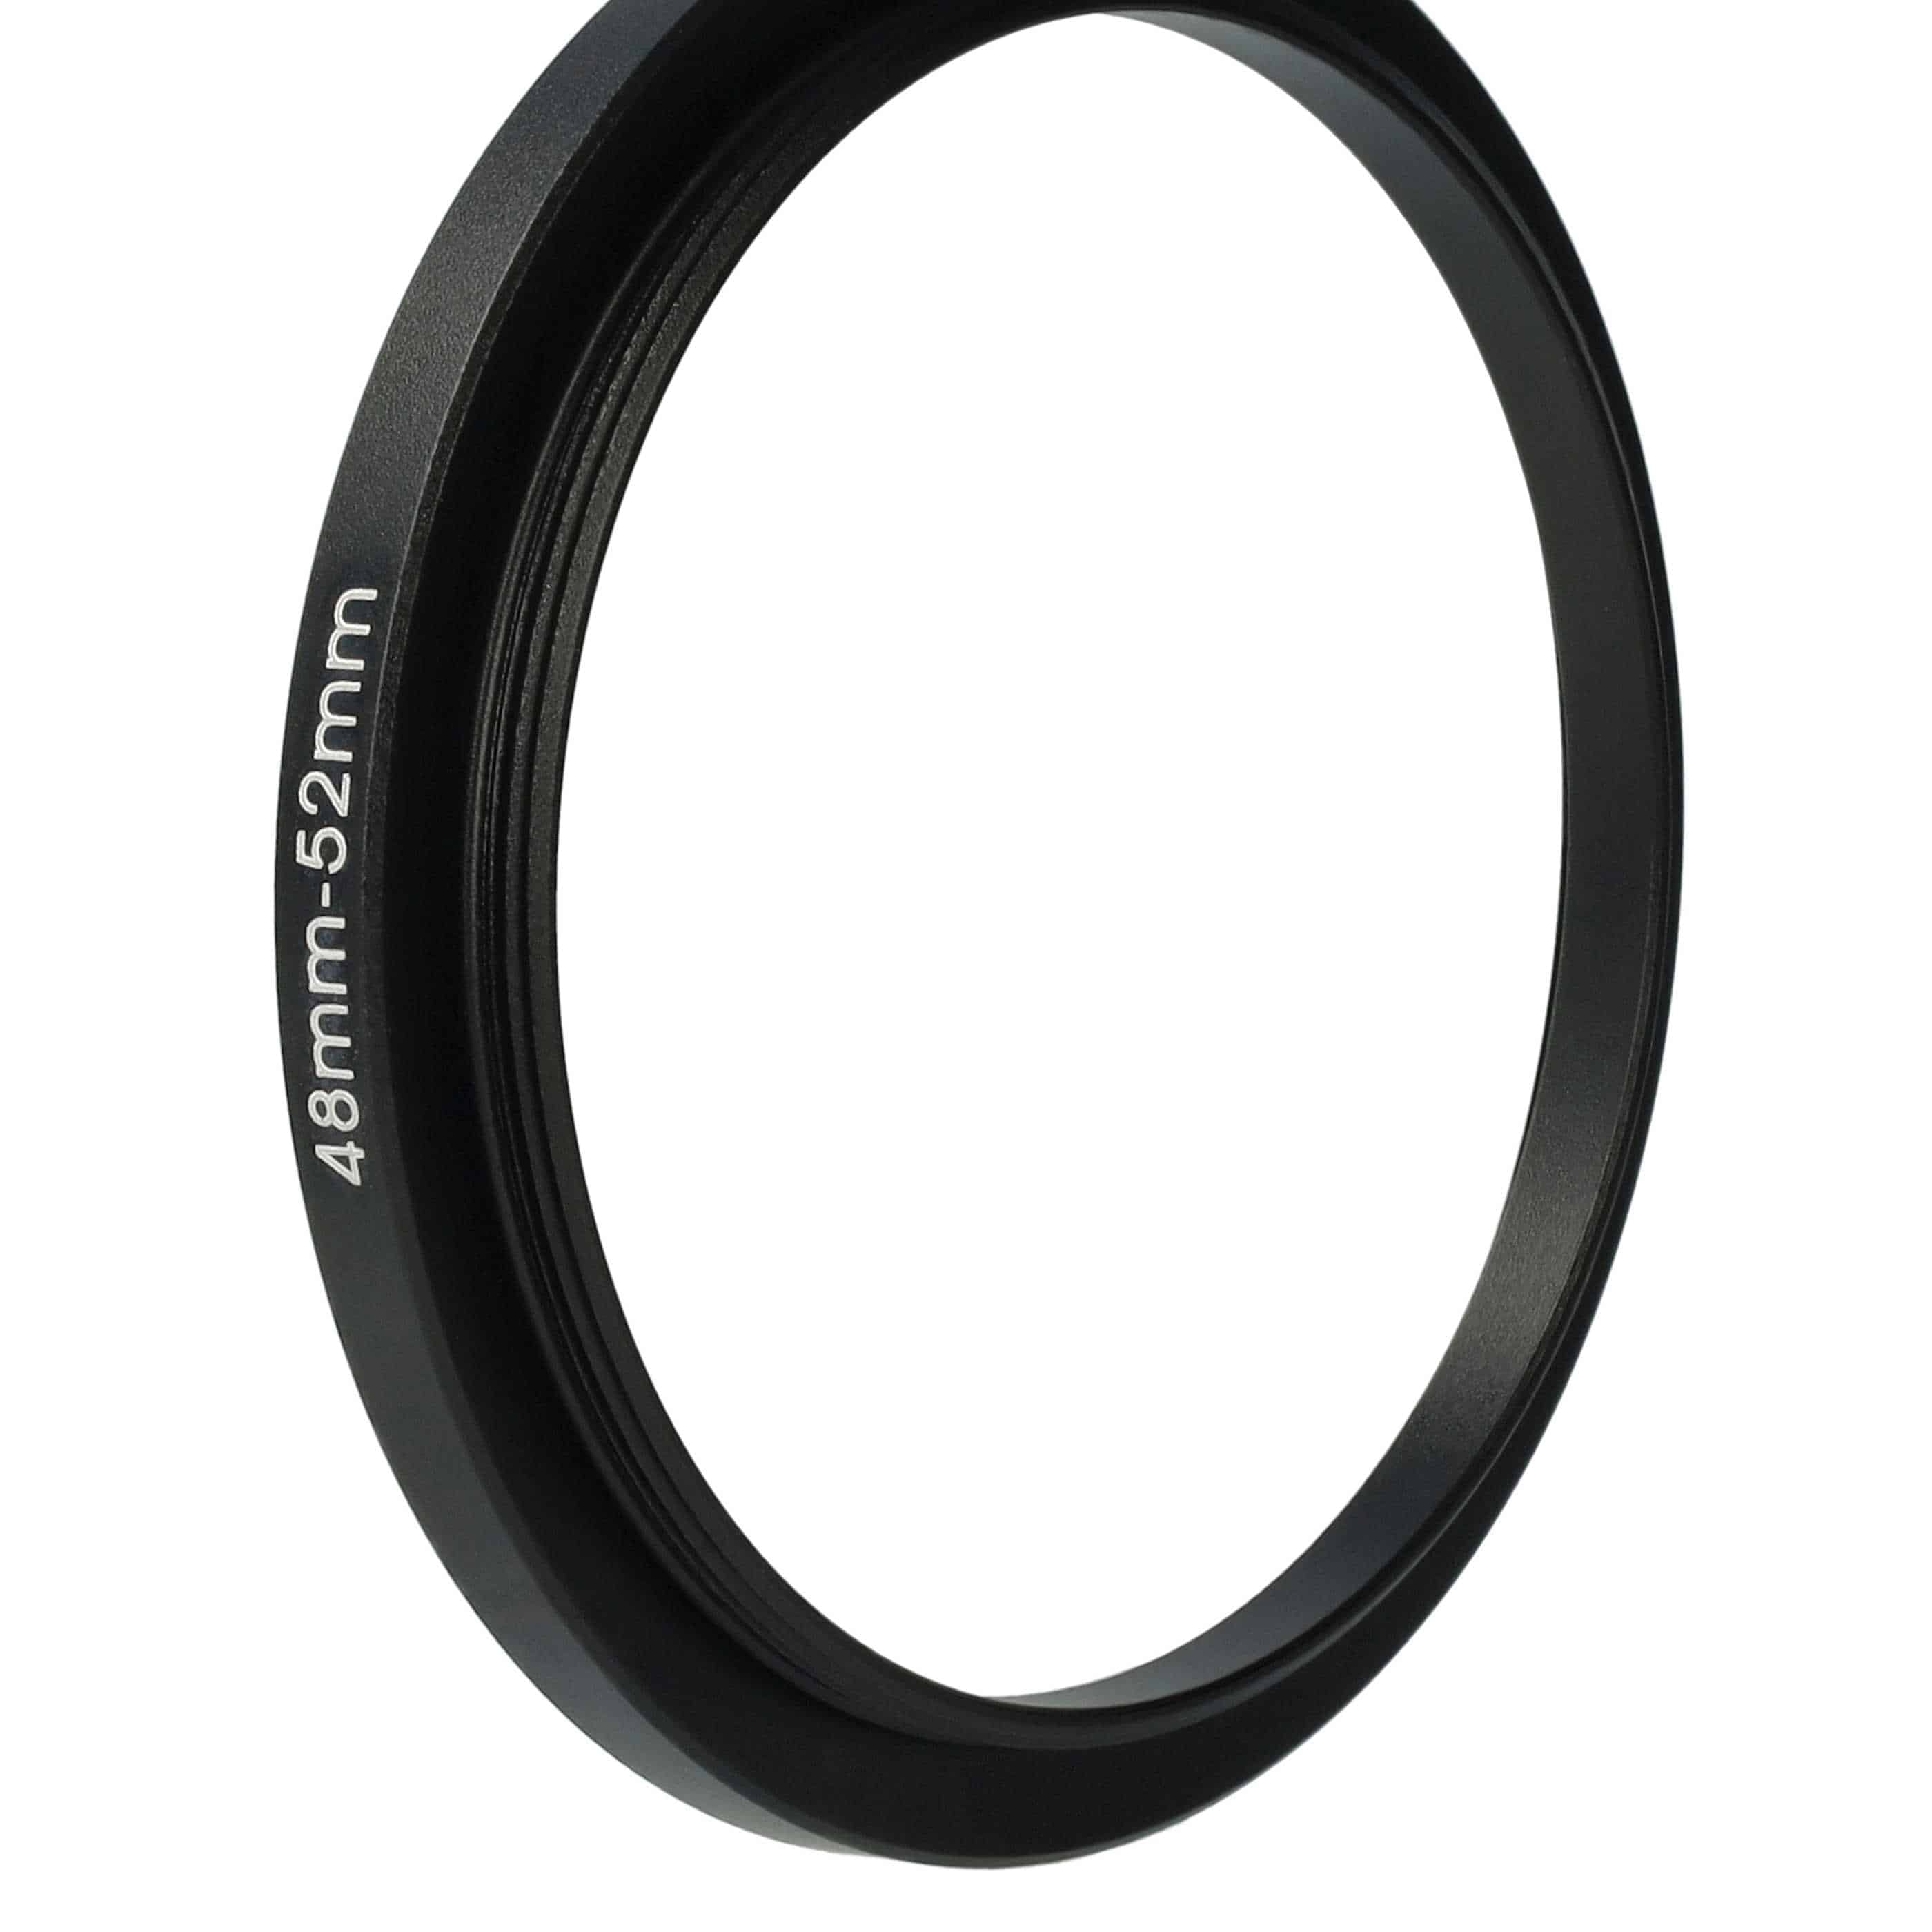 Step-Up Ring Adapter of 48 mm to 52 mmfor various Camera Lens - Filter Adapter